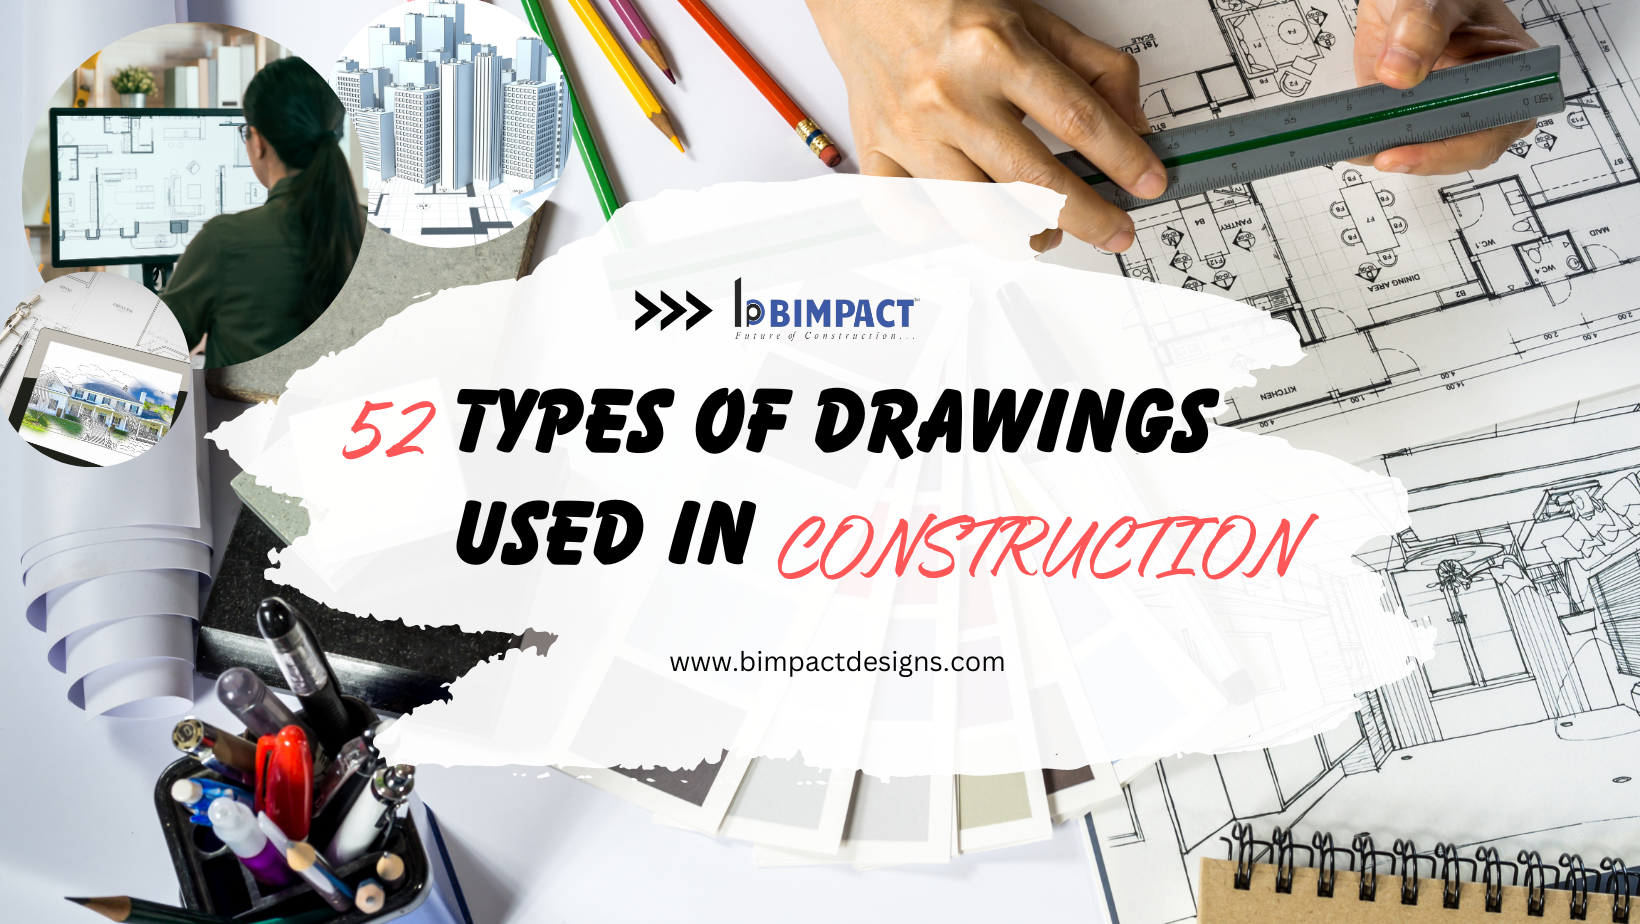 52 TYPES OF DRAWINGS USED IN CONSTRUCTION bimpact